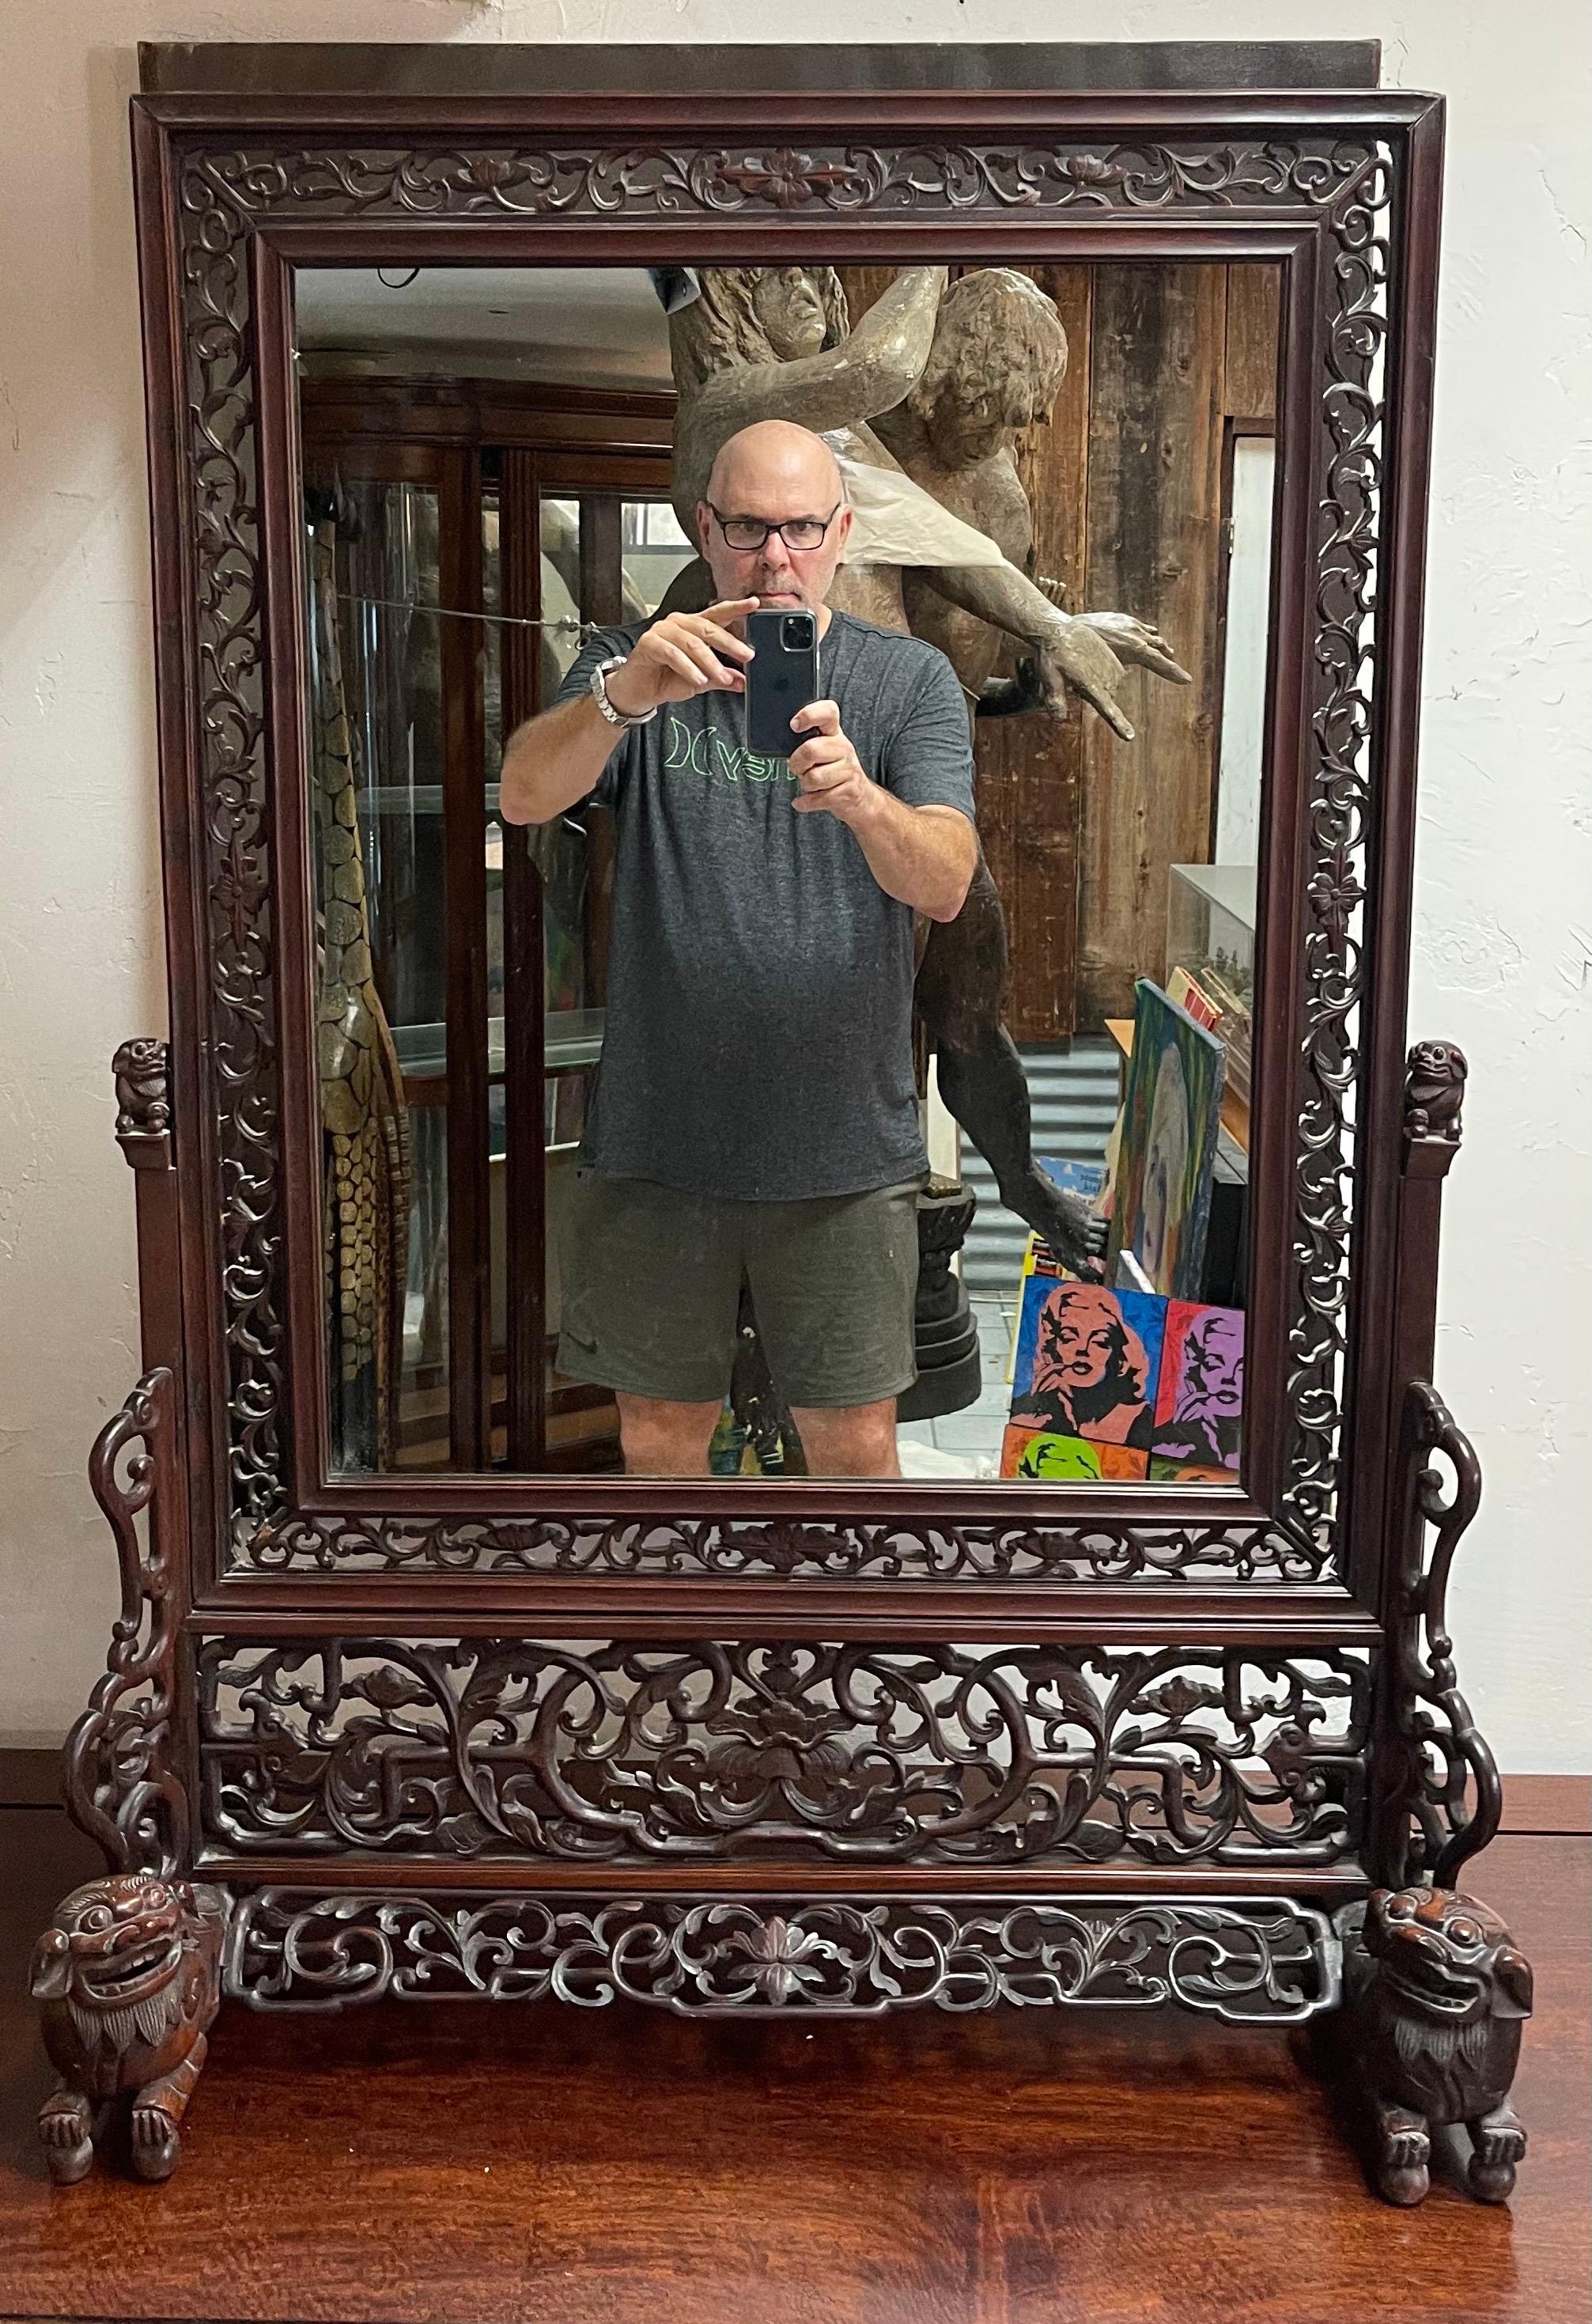 Incredible large one-of-a-kind Chinese rosewood table mirror with foo dogs & lattice work, circa 1920s. This mirror is gorgeous! It is in very good vintage condition and measures 31.5